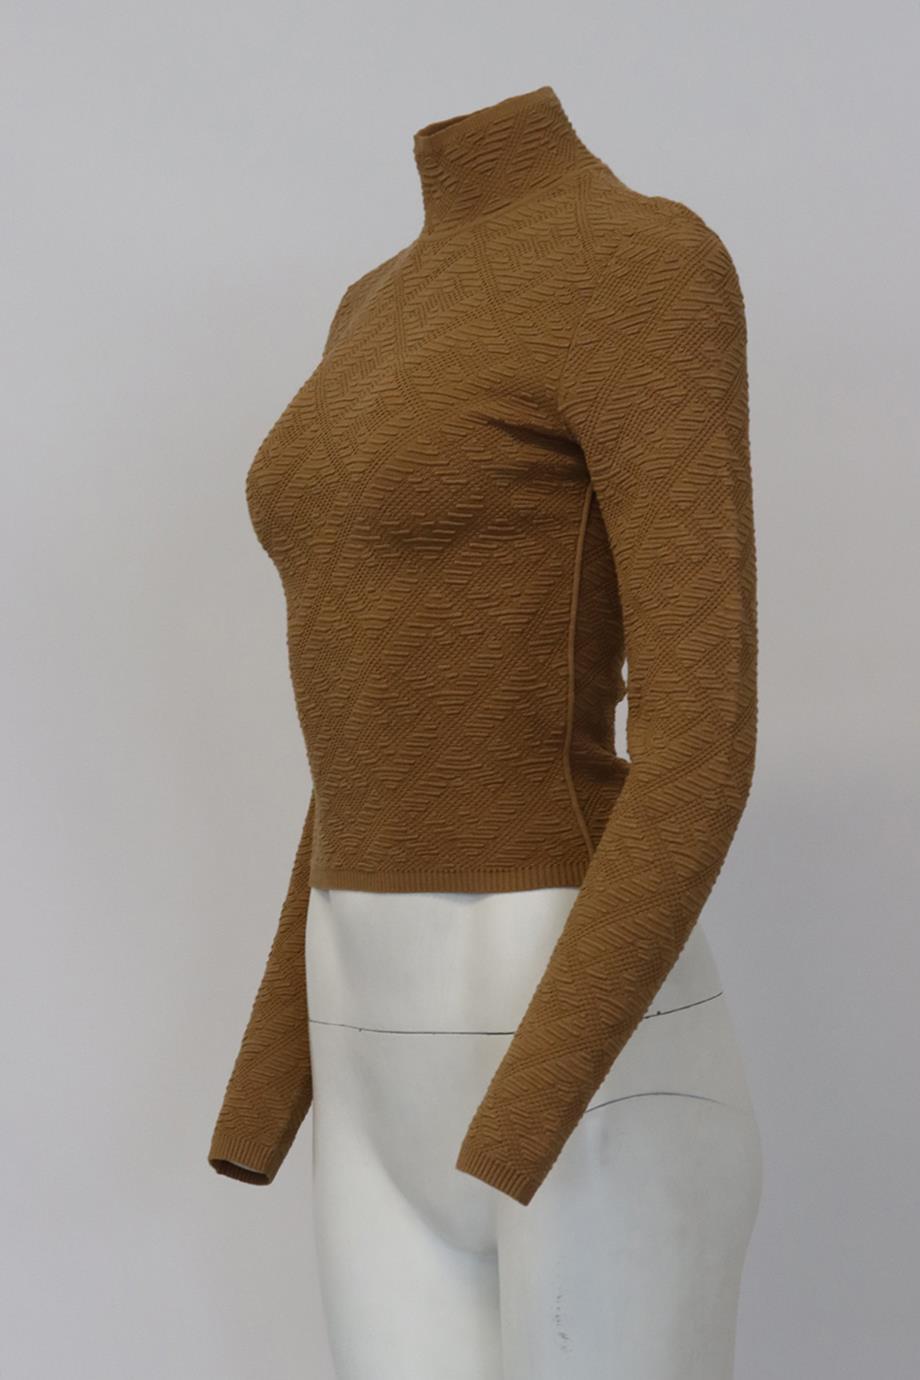 Fendi Ff Jacquard Stretch Knit Turtleneck Sweater It 38 Uk 6 In Excellent Condition In London, GB